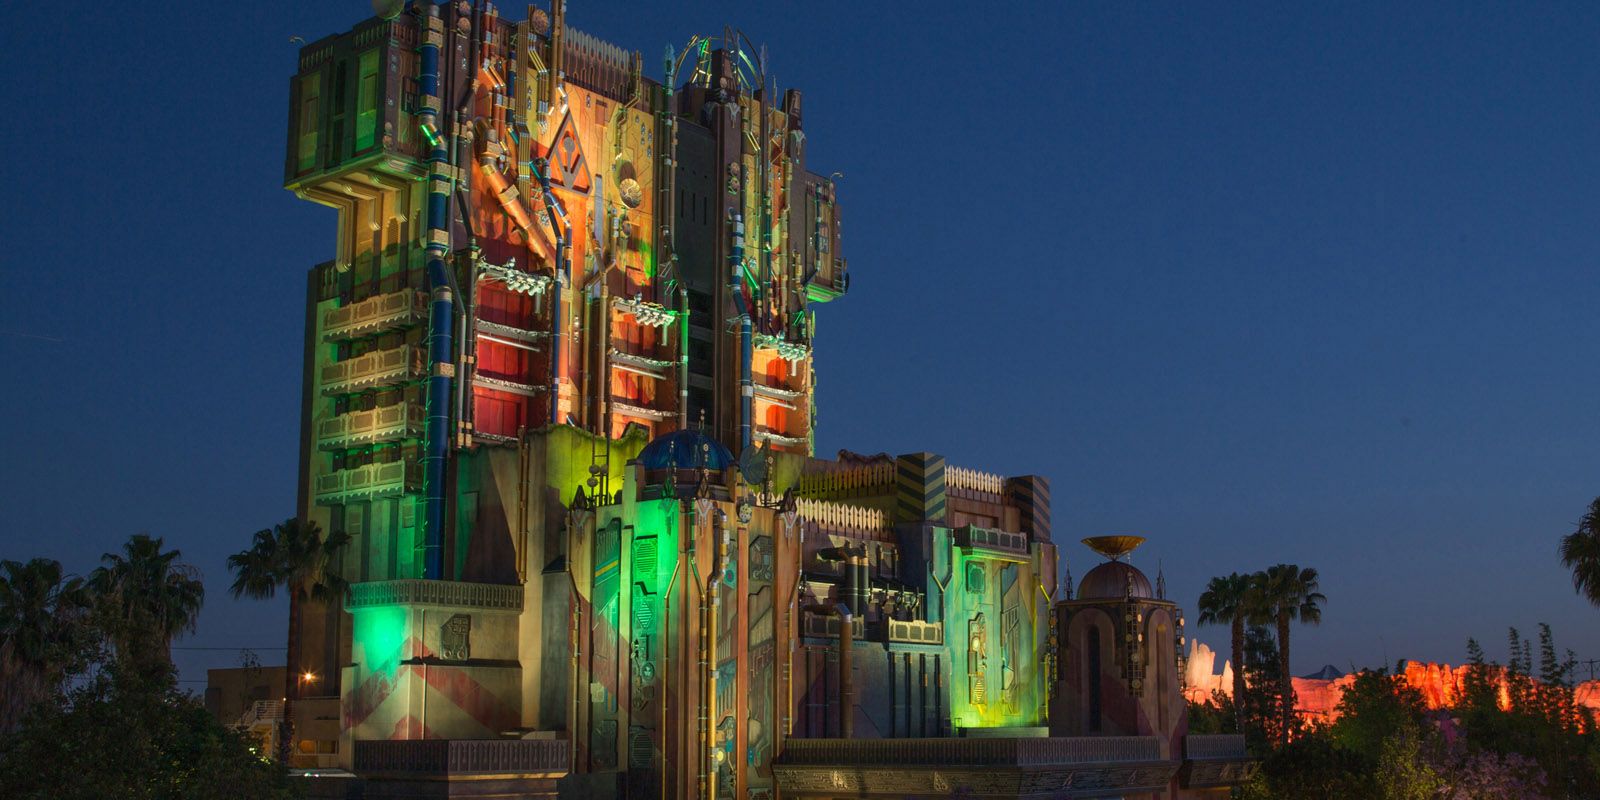 Guardians of the Galaxy Mission Breakout at Disney California Adventure